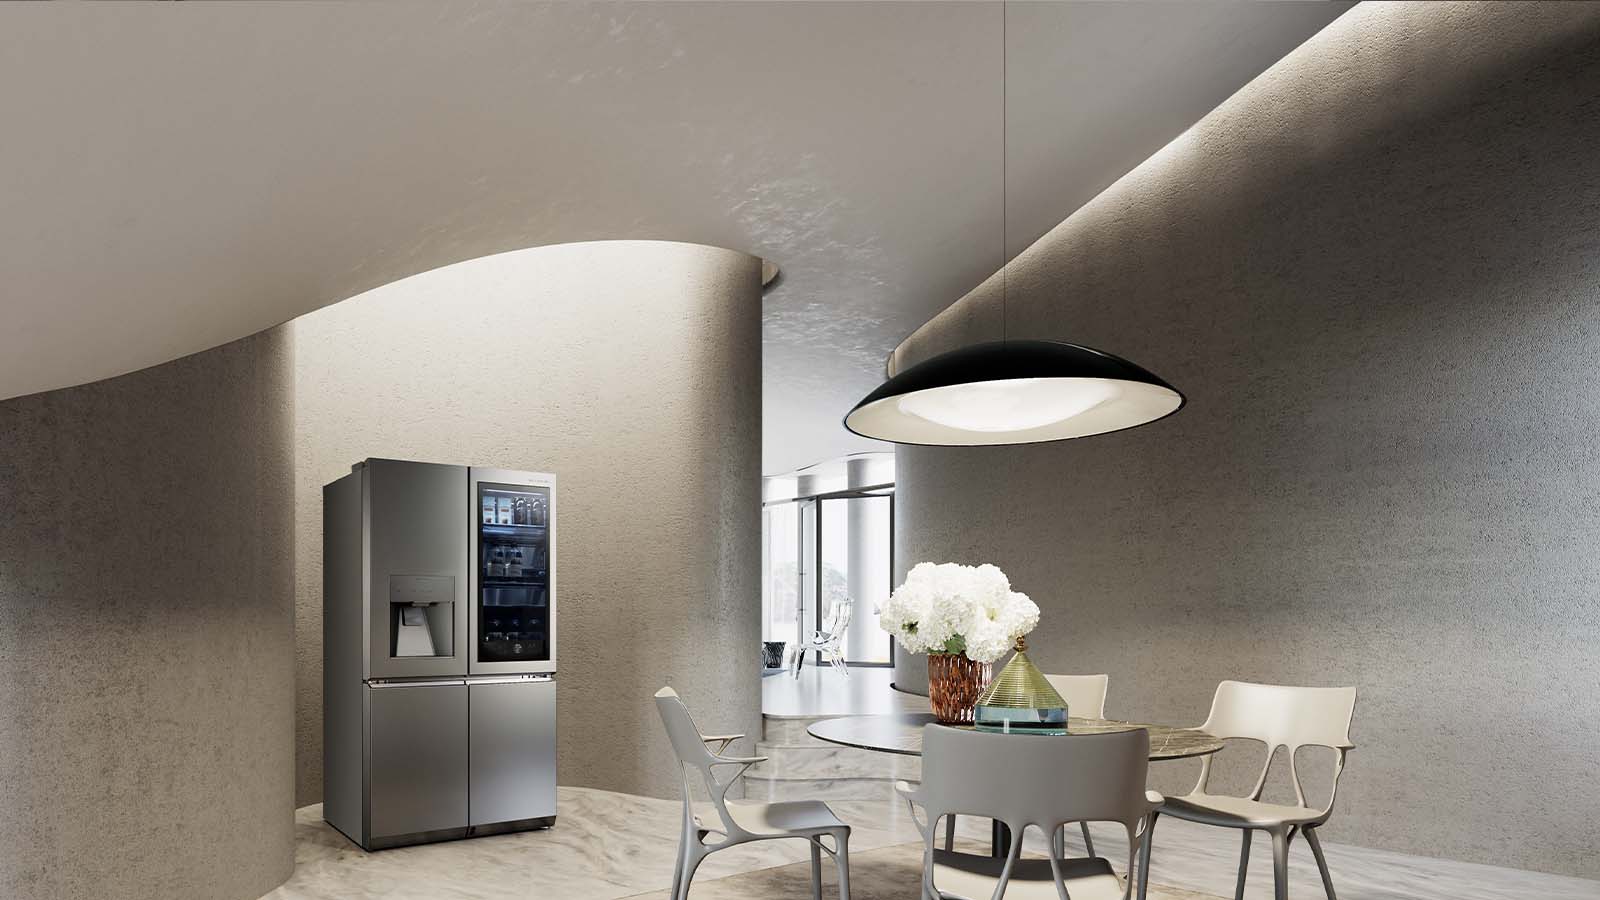 LG Signature Refrigerator in a 3D Virtual Space